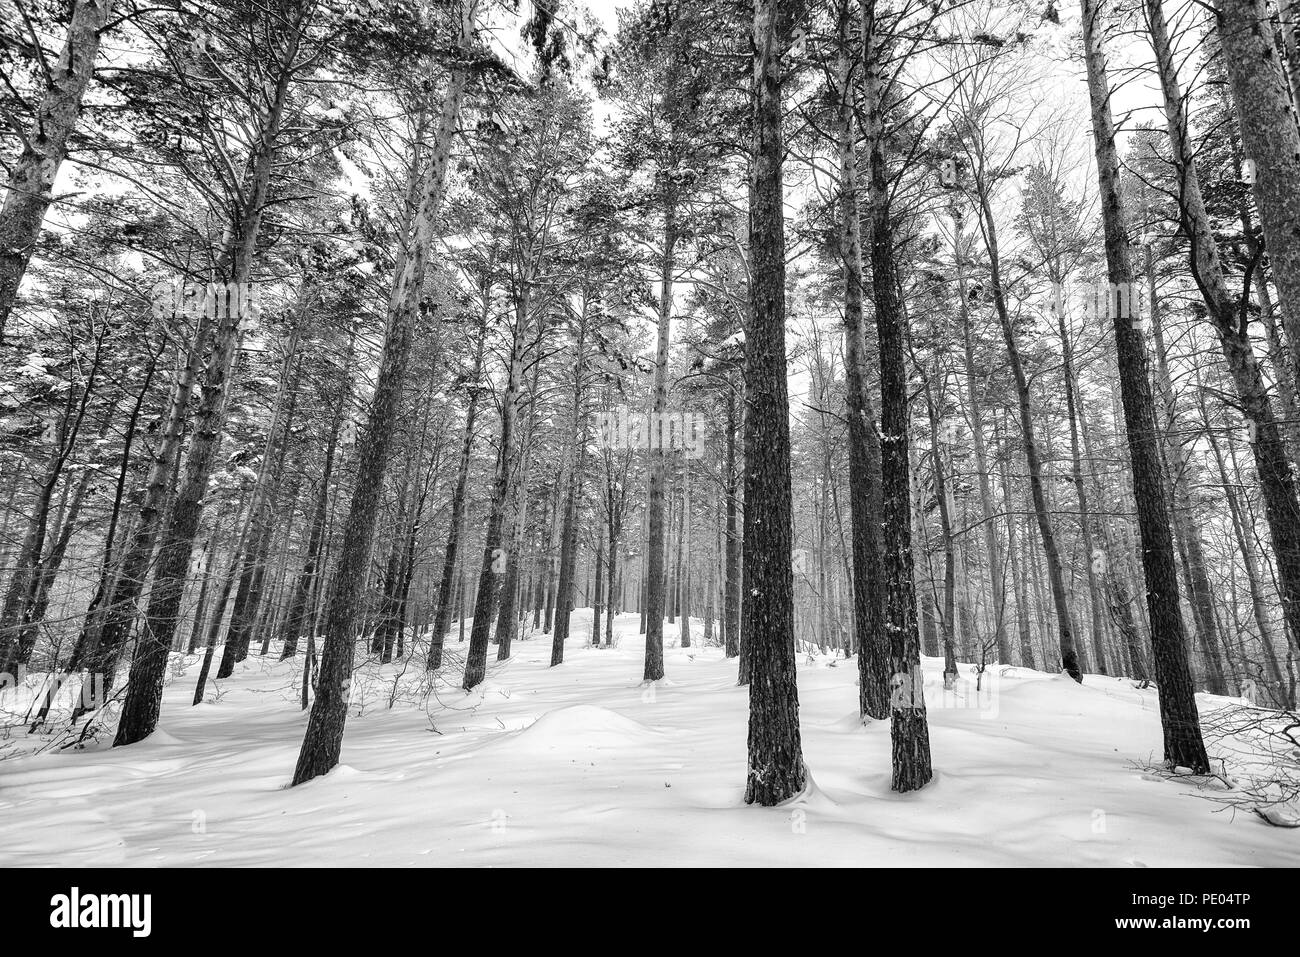 Snow covered pine trees in winter forest. Winter forest with trees.Black and white image Stock Photo